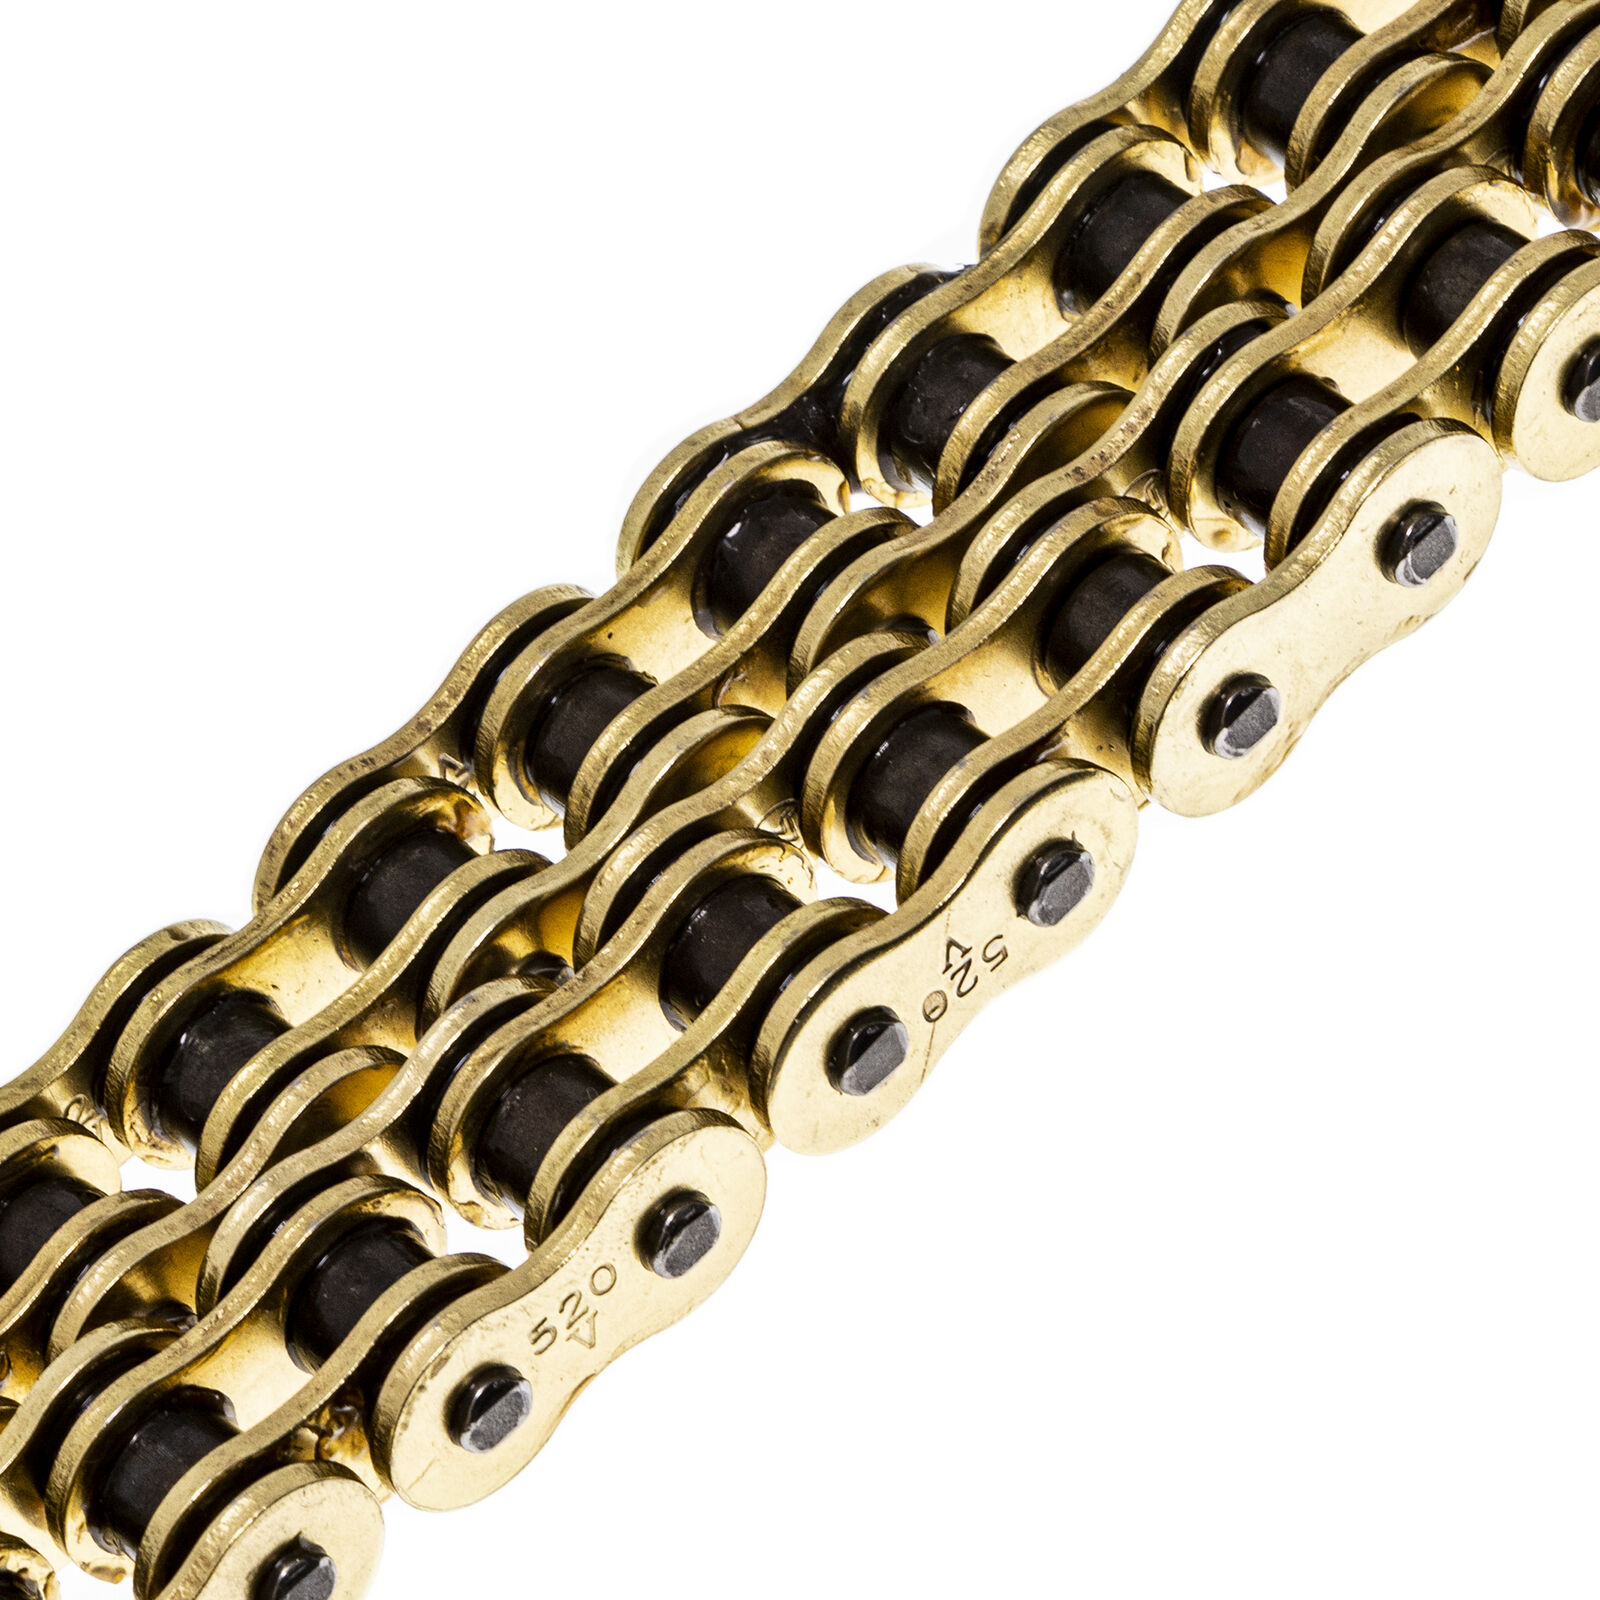 NICHE Gold 520 X-Ring Chain 114 Links With Connecting Master Link Motorcycle